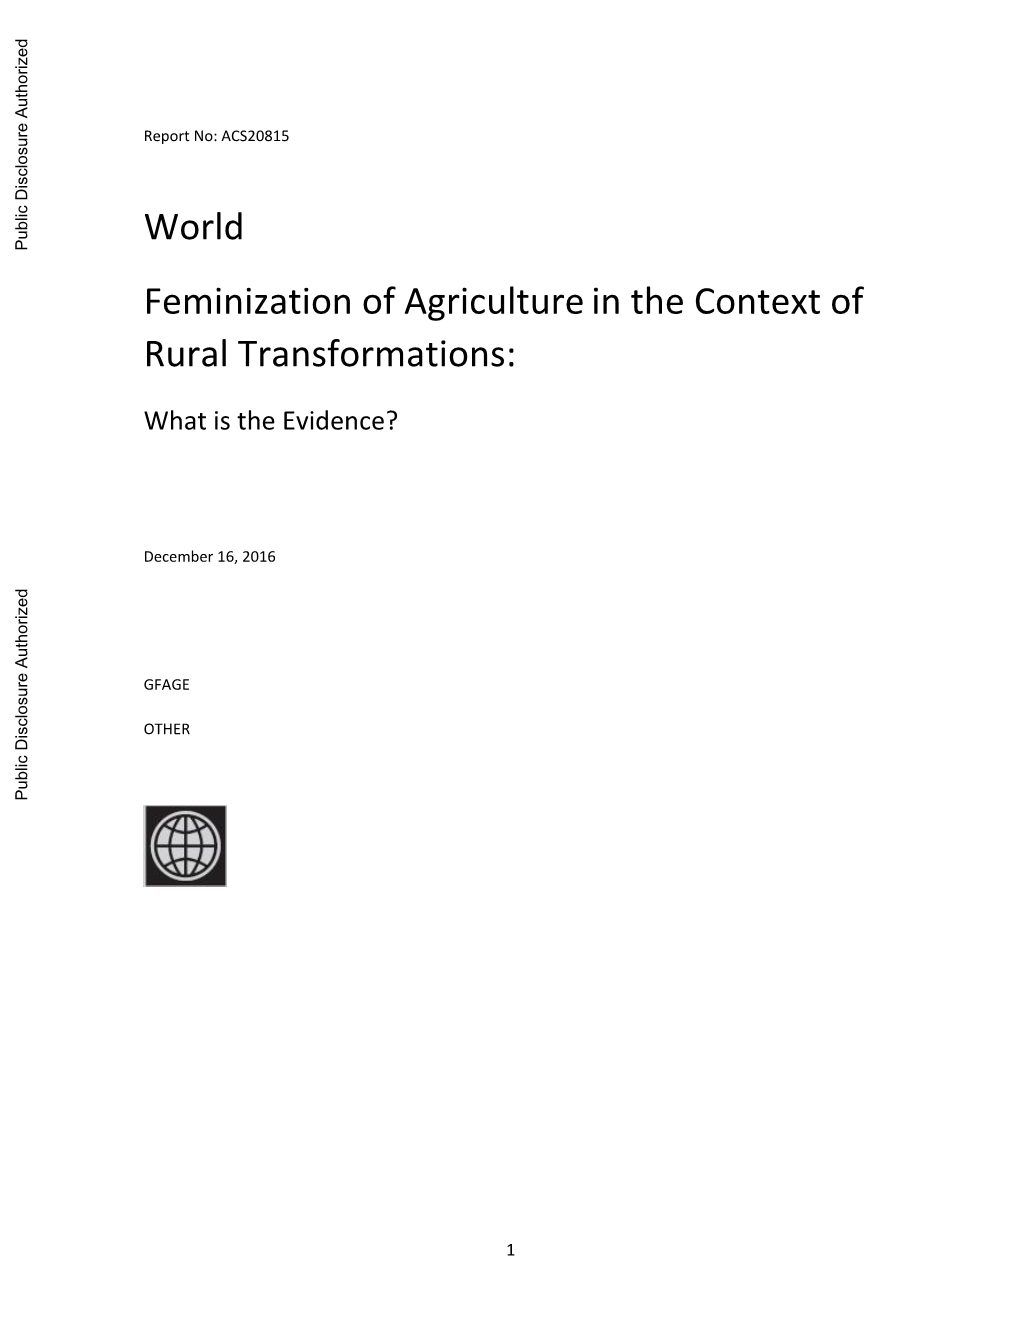 Feminization of Agriculture in the Context